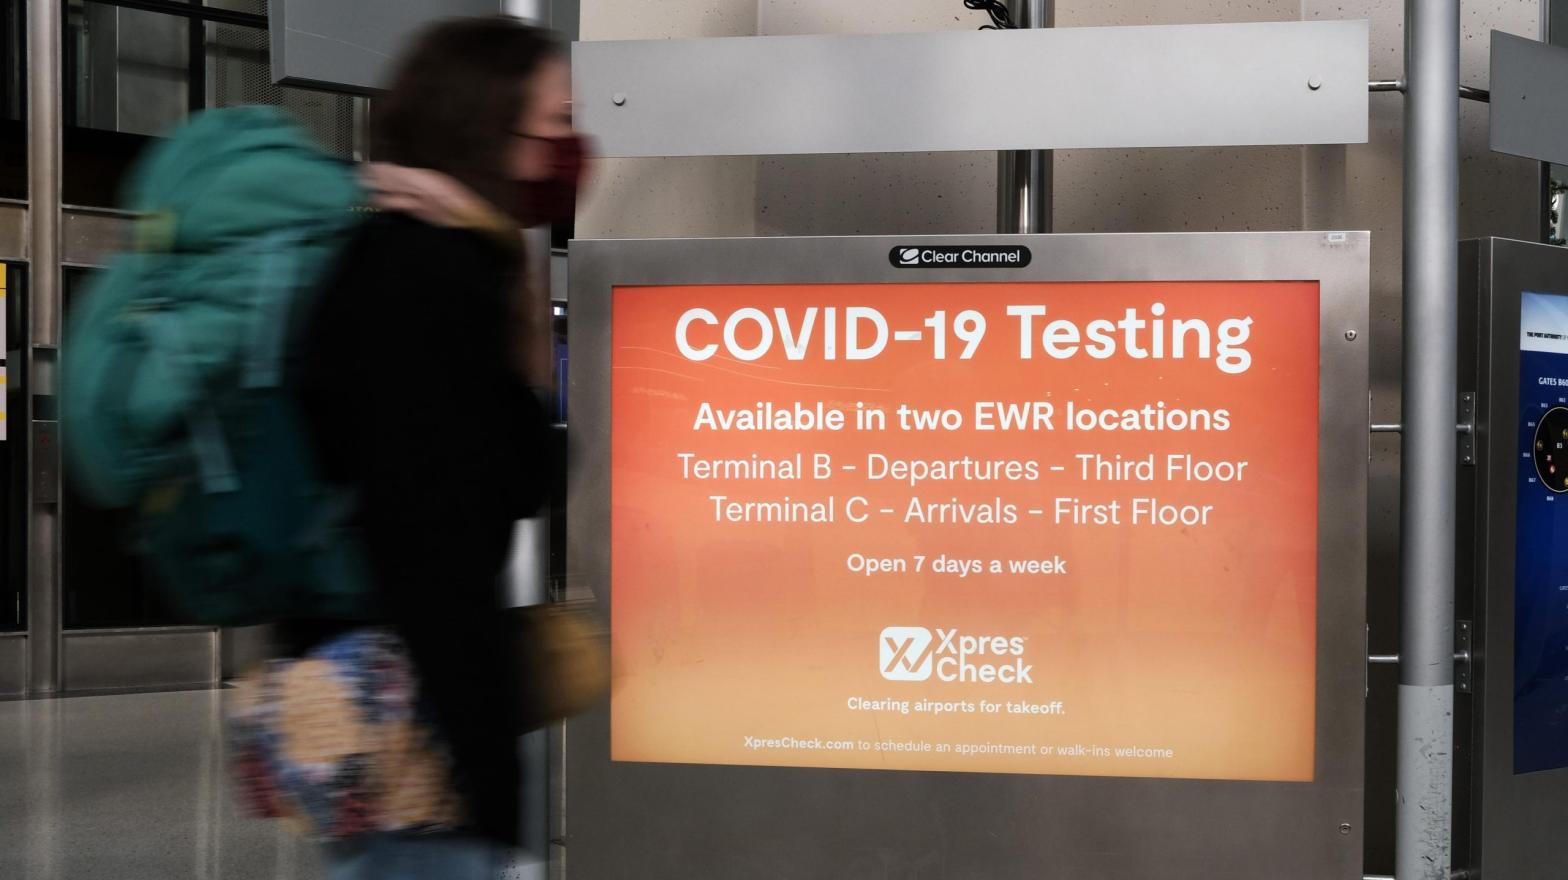 A covid-19 testing facility is advertised at Newark Liberty International Airport on November 30, 2021 in New Jersey. (Photo: Spencer Platt, Getty Images)